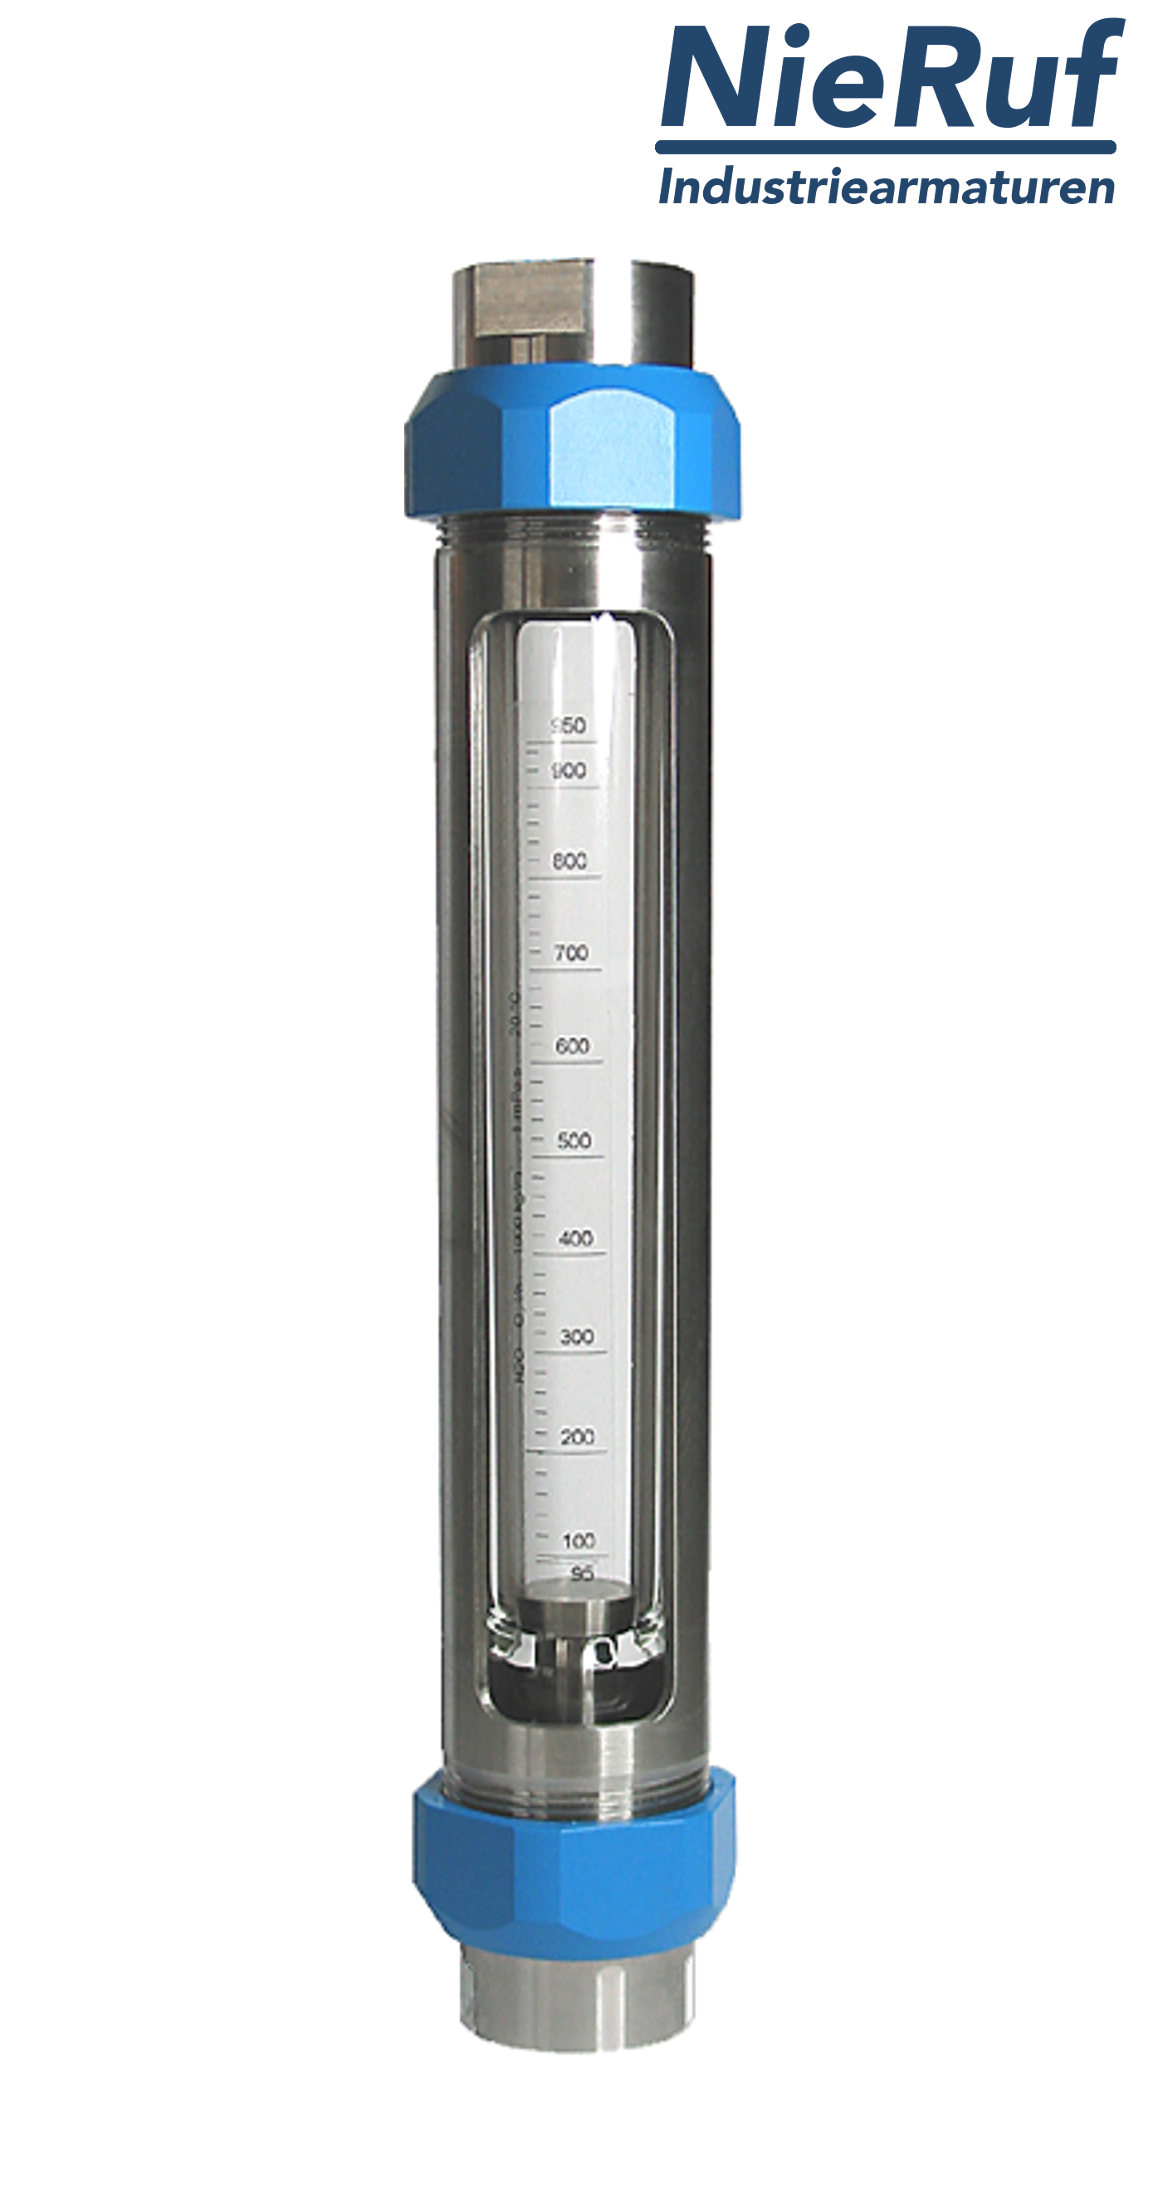 Variable area flowmeter stainless steel + borosilicate 1 1/4" inch 6000.0 - 20000 l/h water FKM